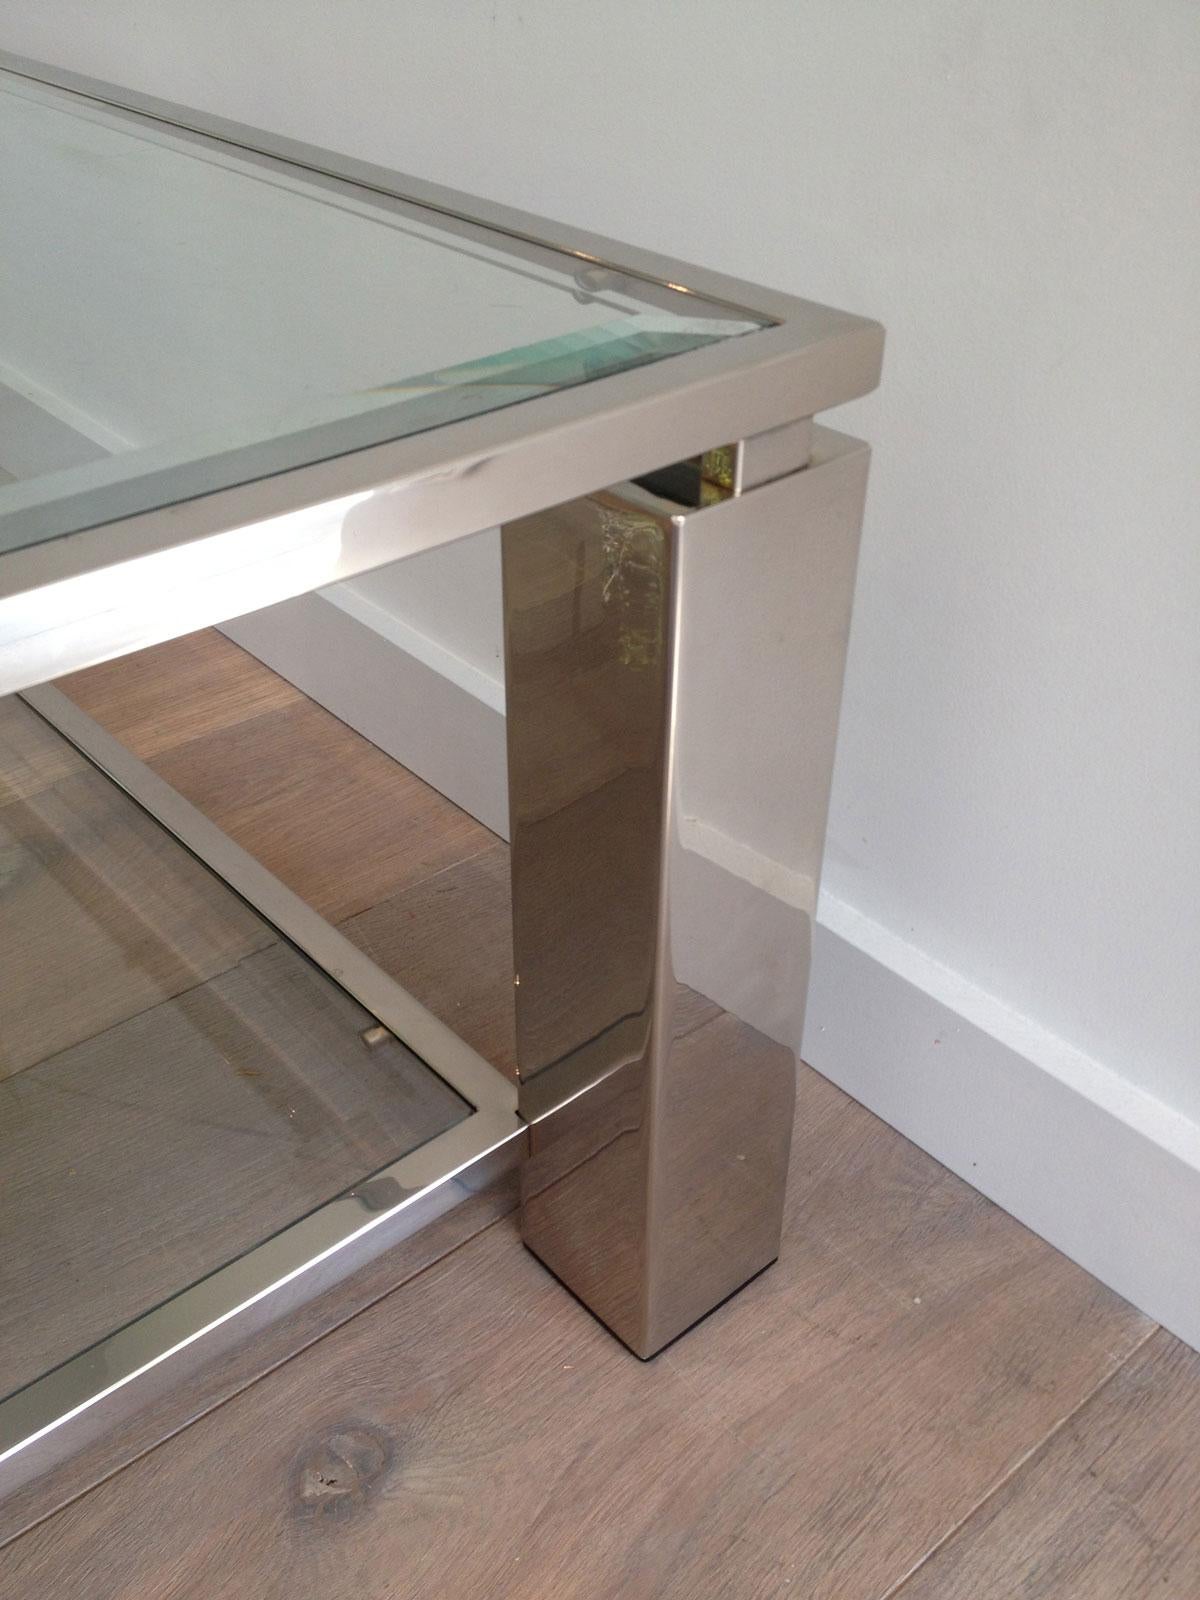 Late 20th Century Modernist Chrome Coffee Table, French, Circa 1970 For Sale